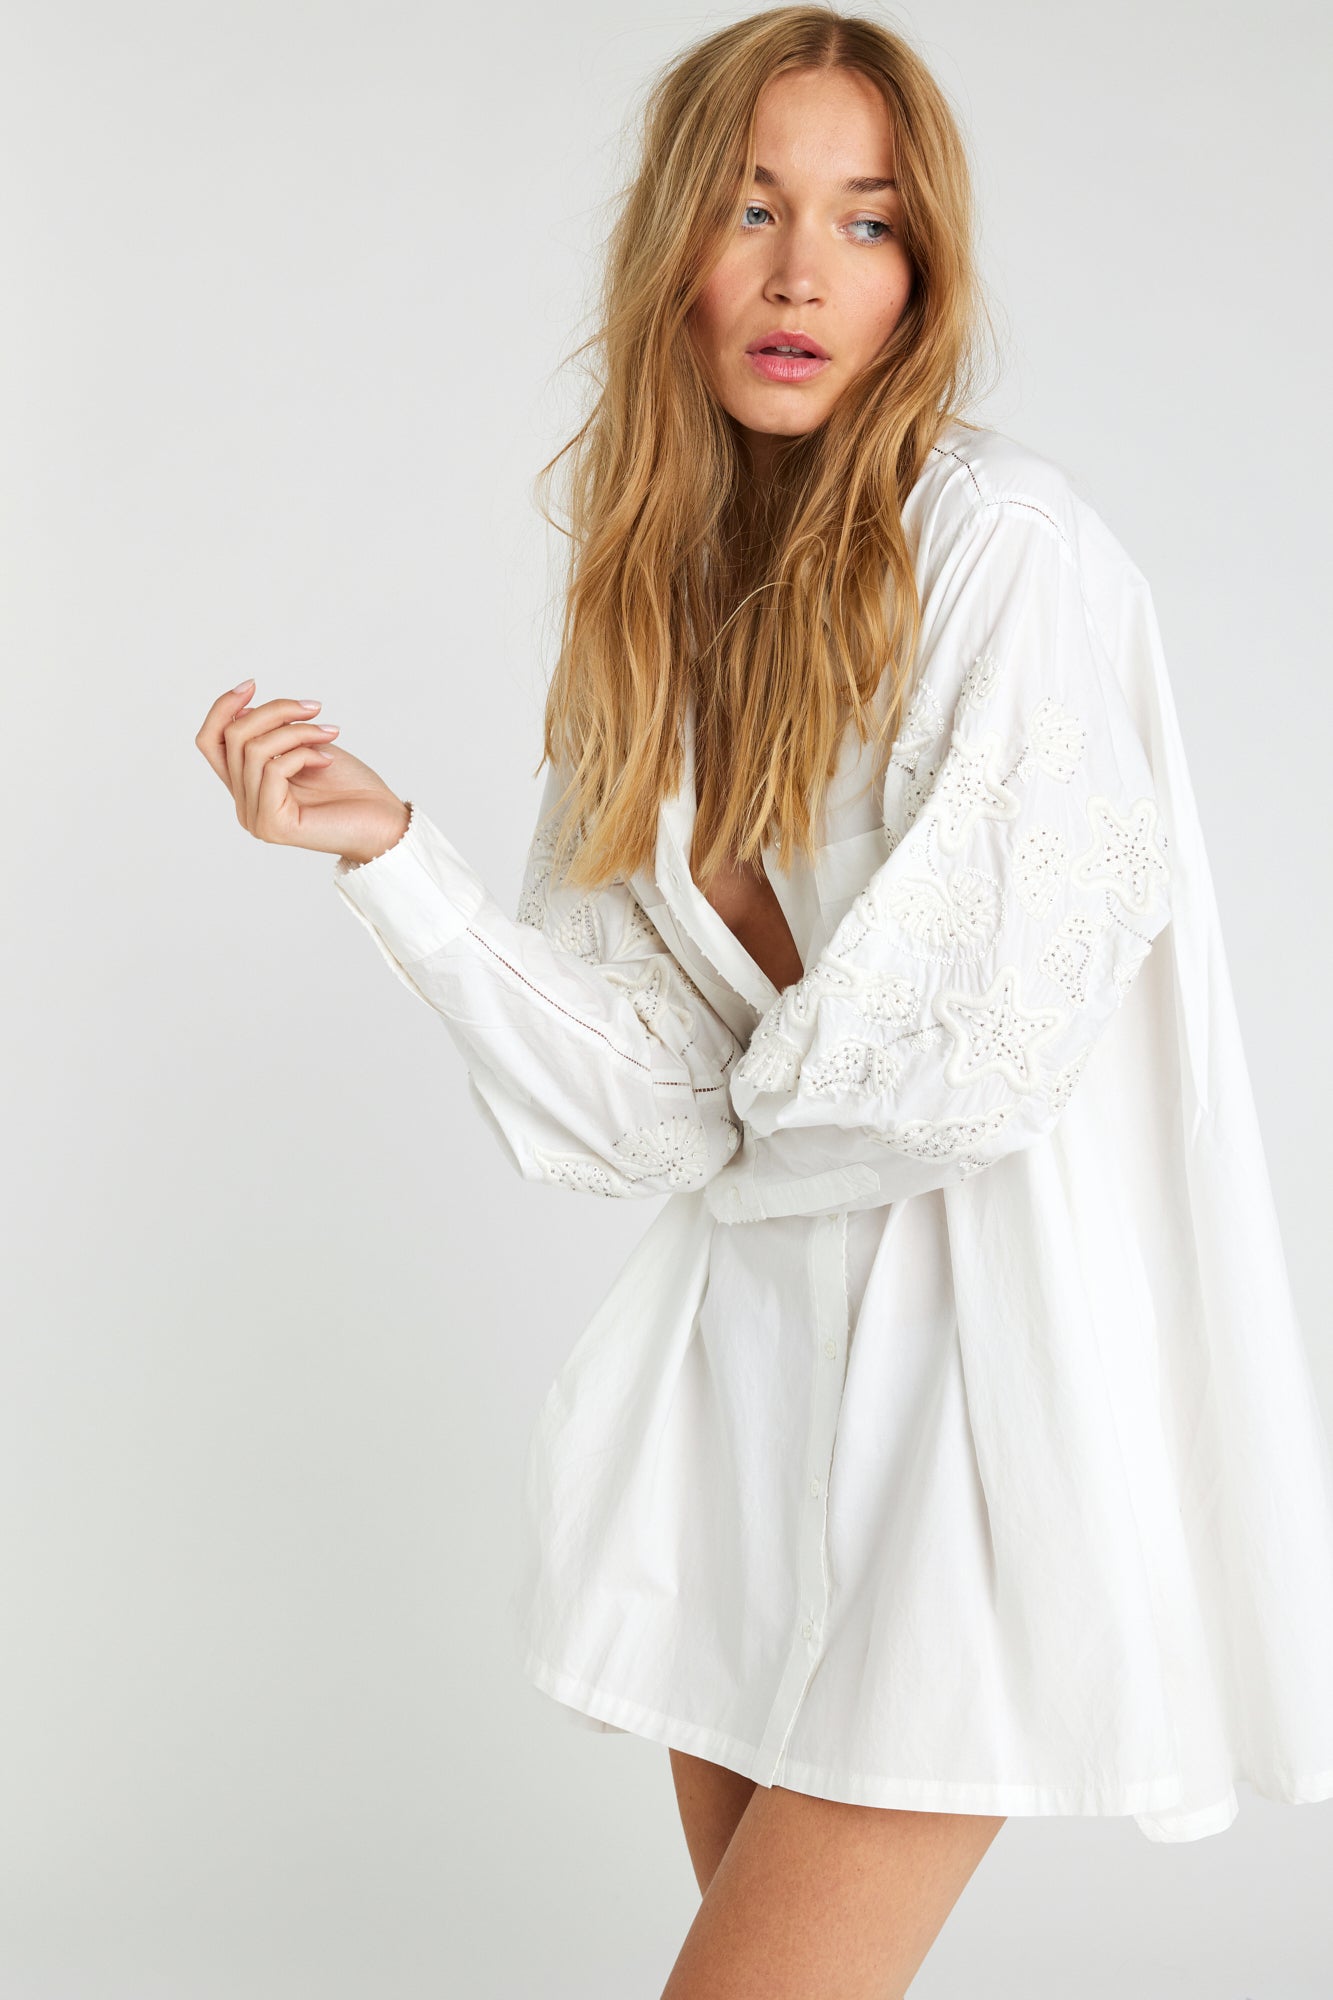 Ogaan embroidered white shirt